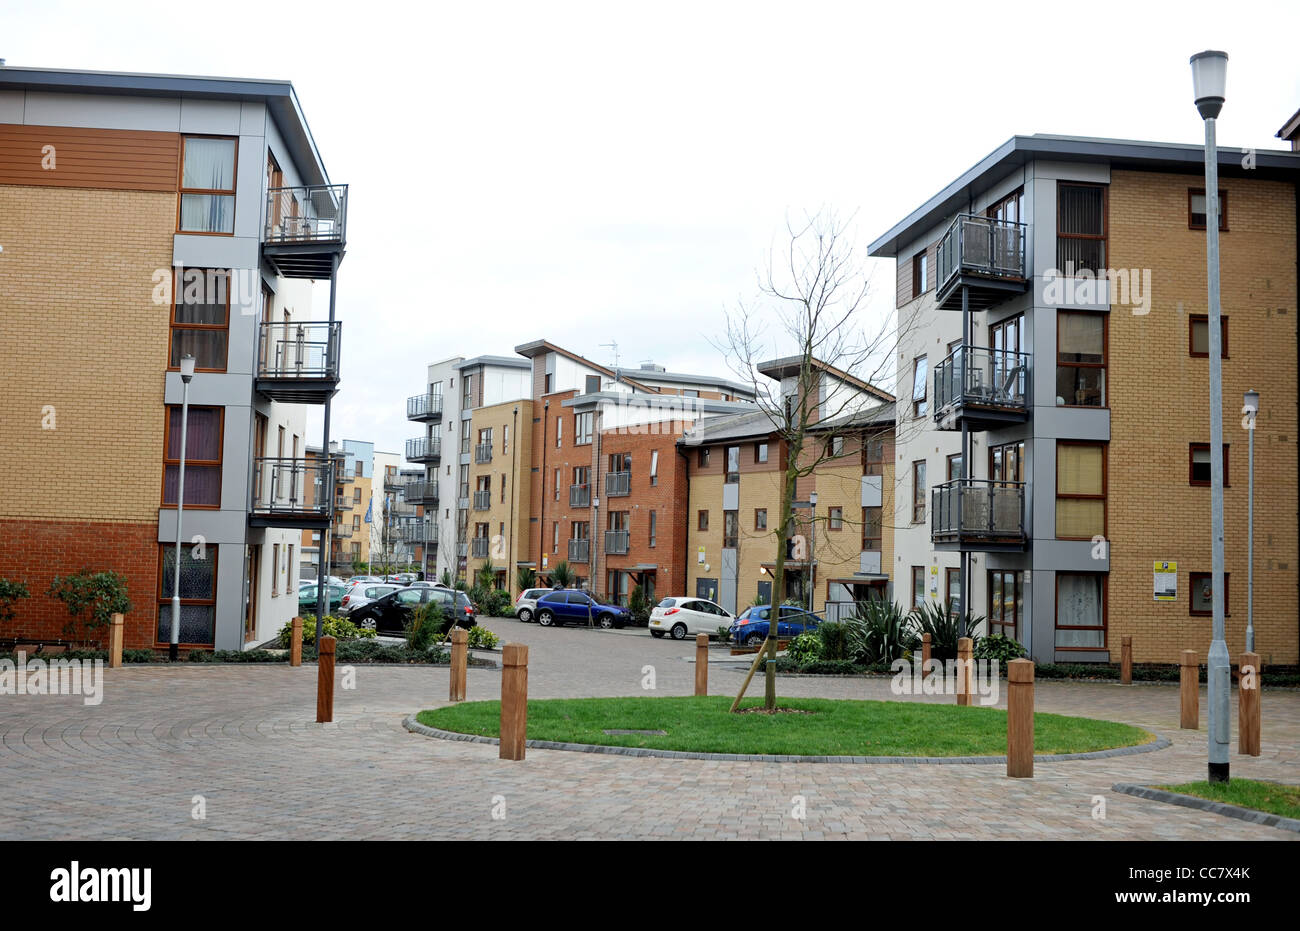 The Pembroke Park new housing estate of appartments and modern living flats in Crawley West Sussex UK Stock Photo